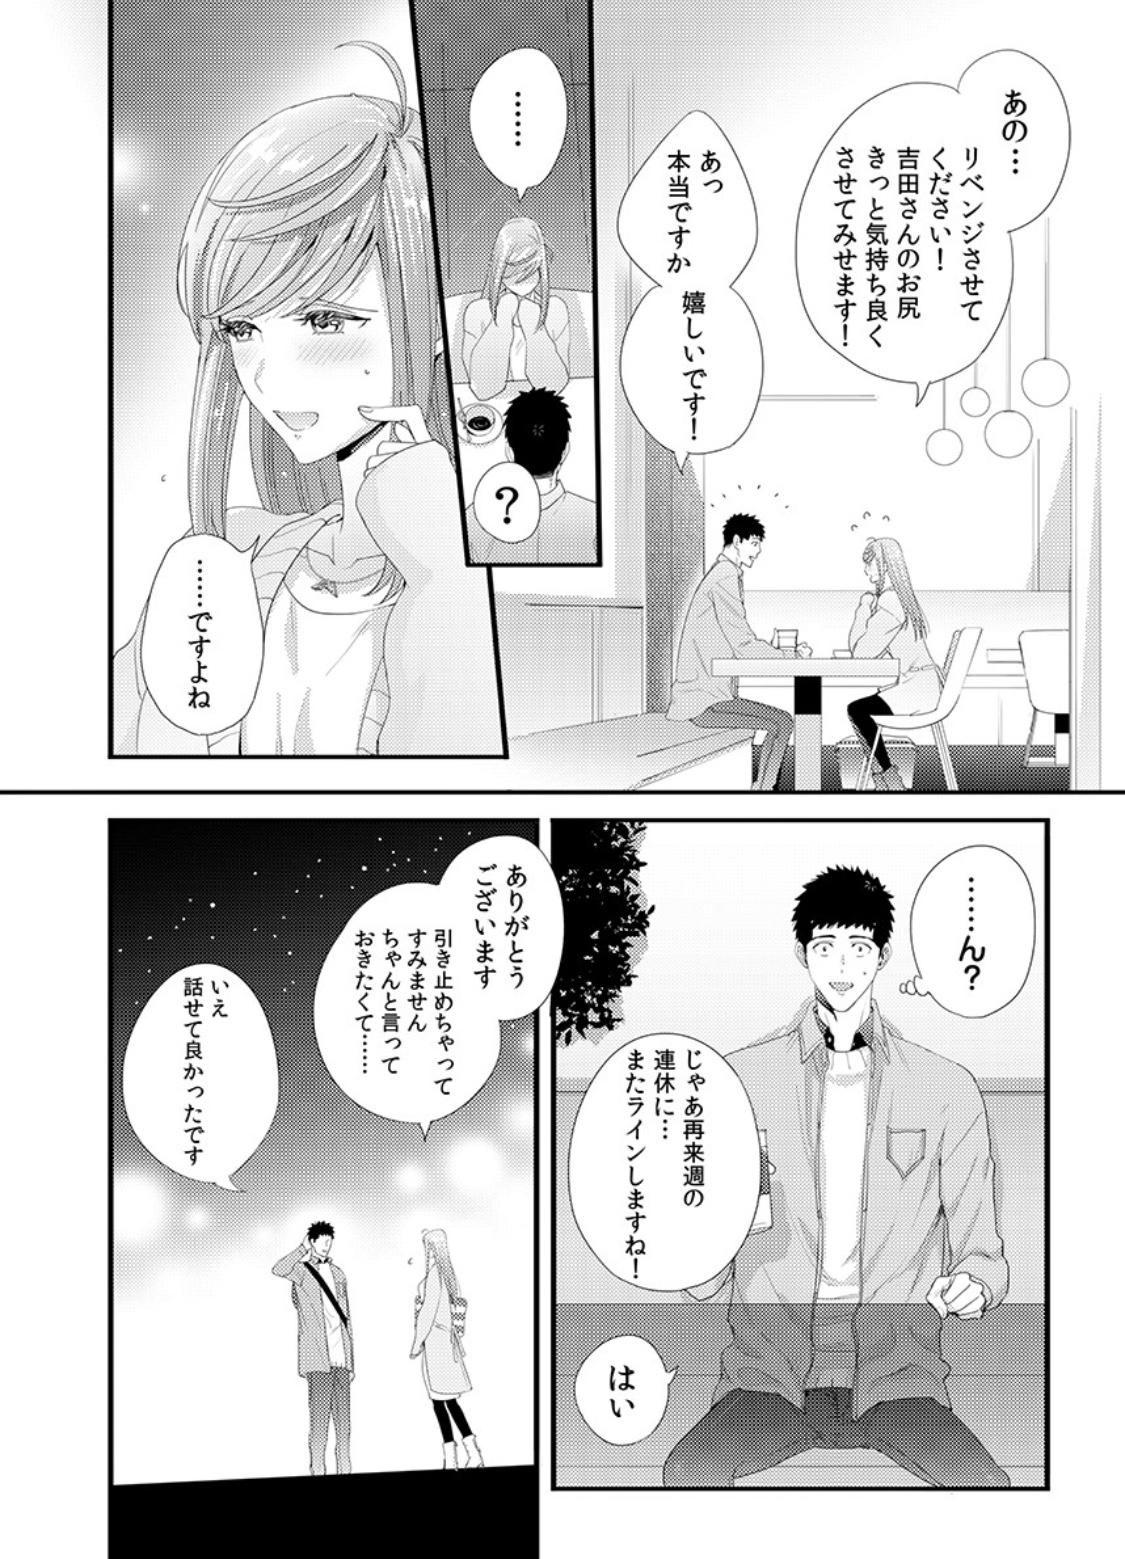 Please Let Me Hold You Futaba-San! Ch. 1+2 36